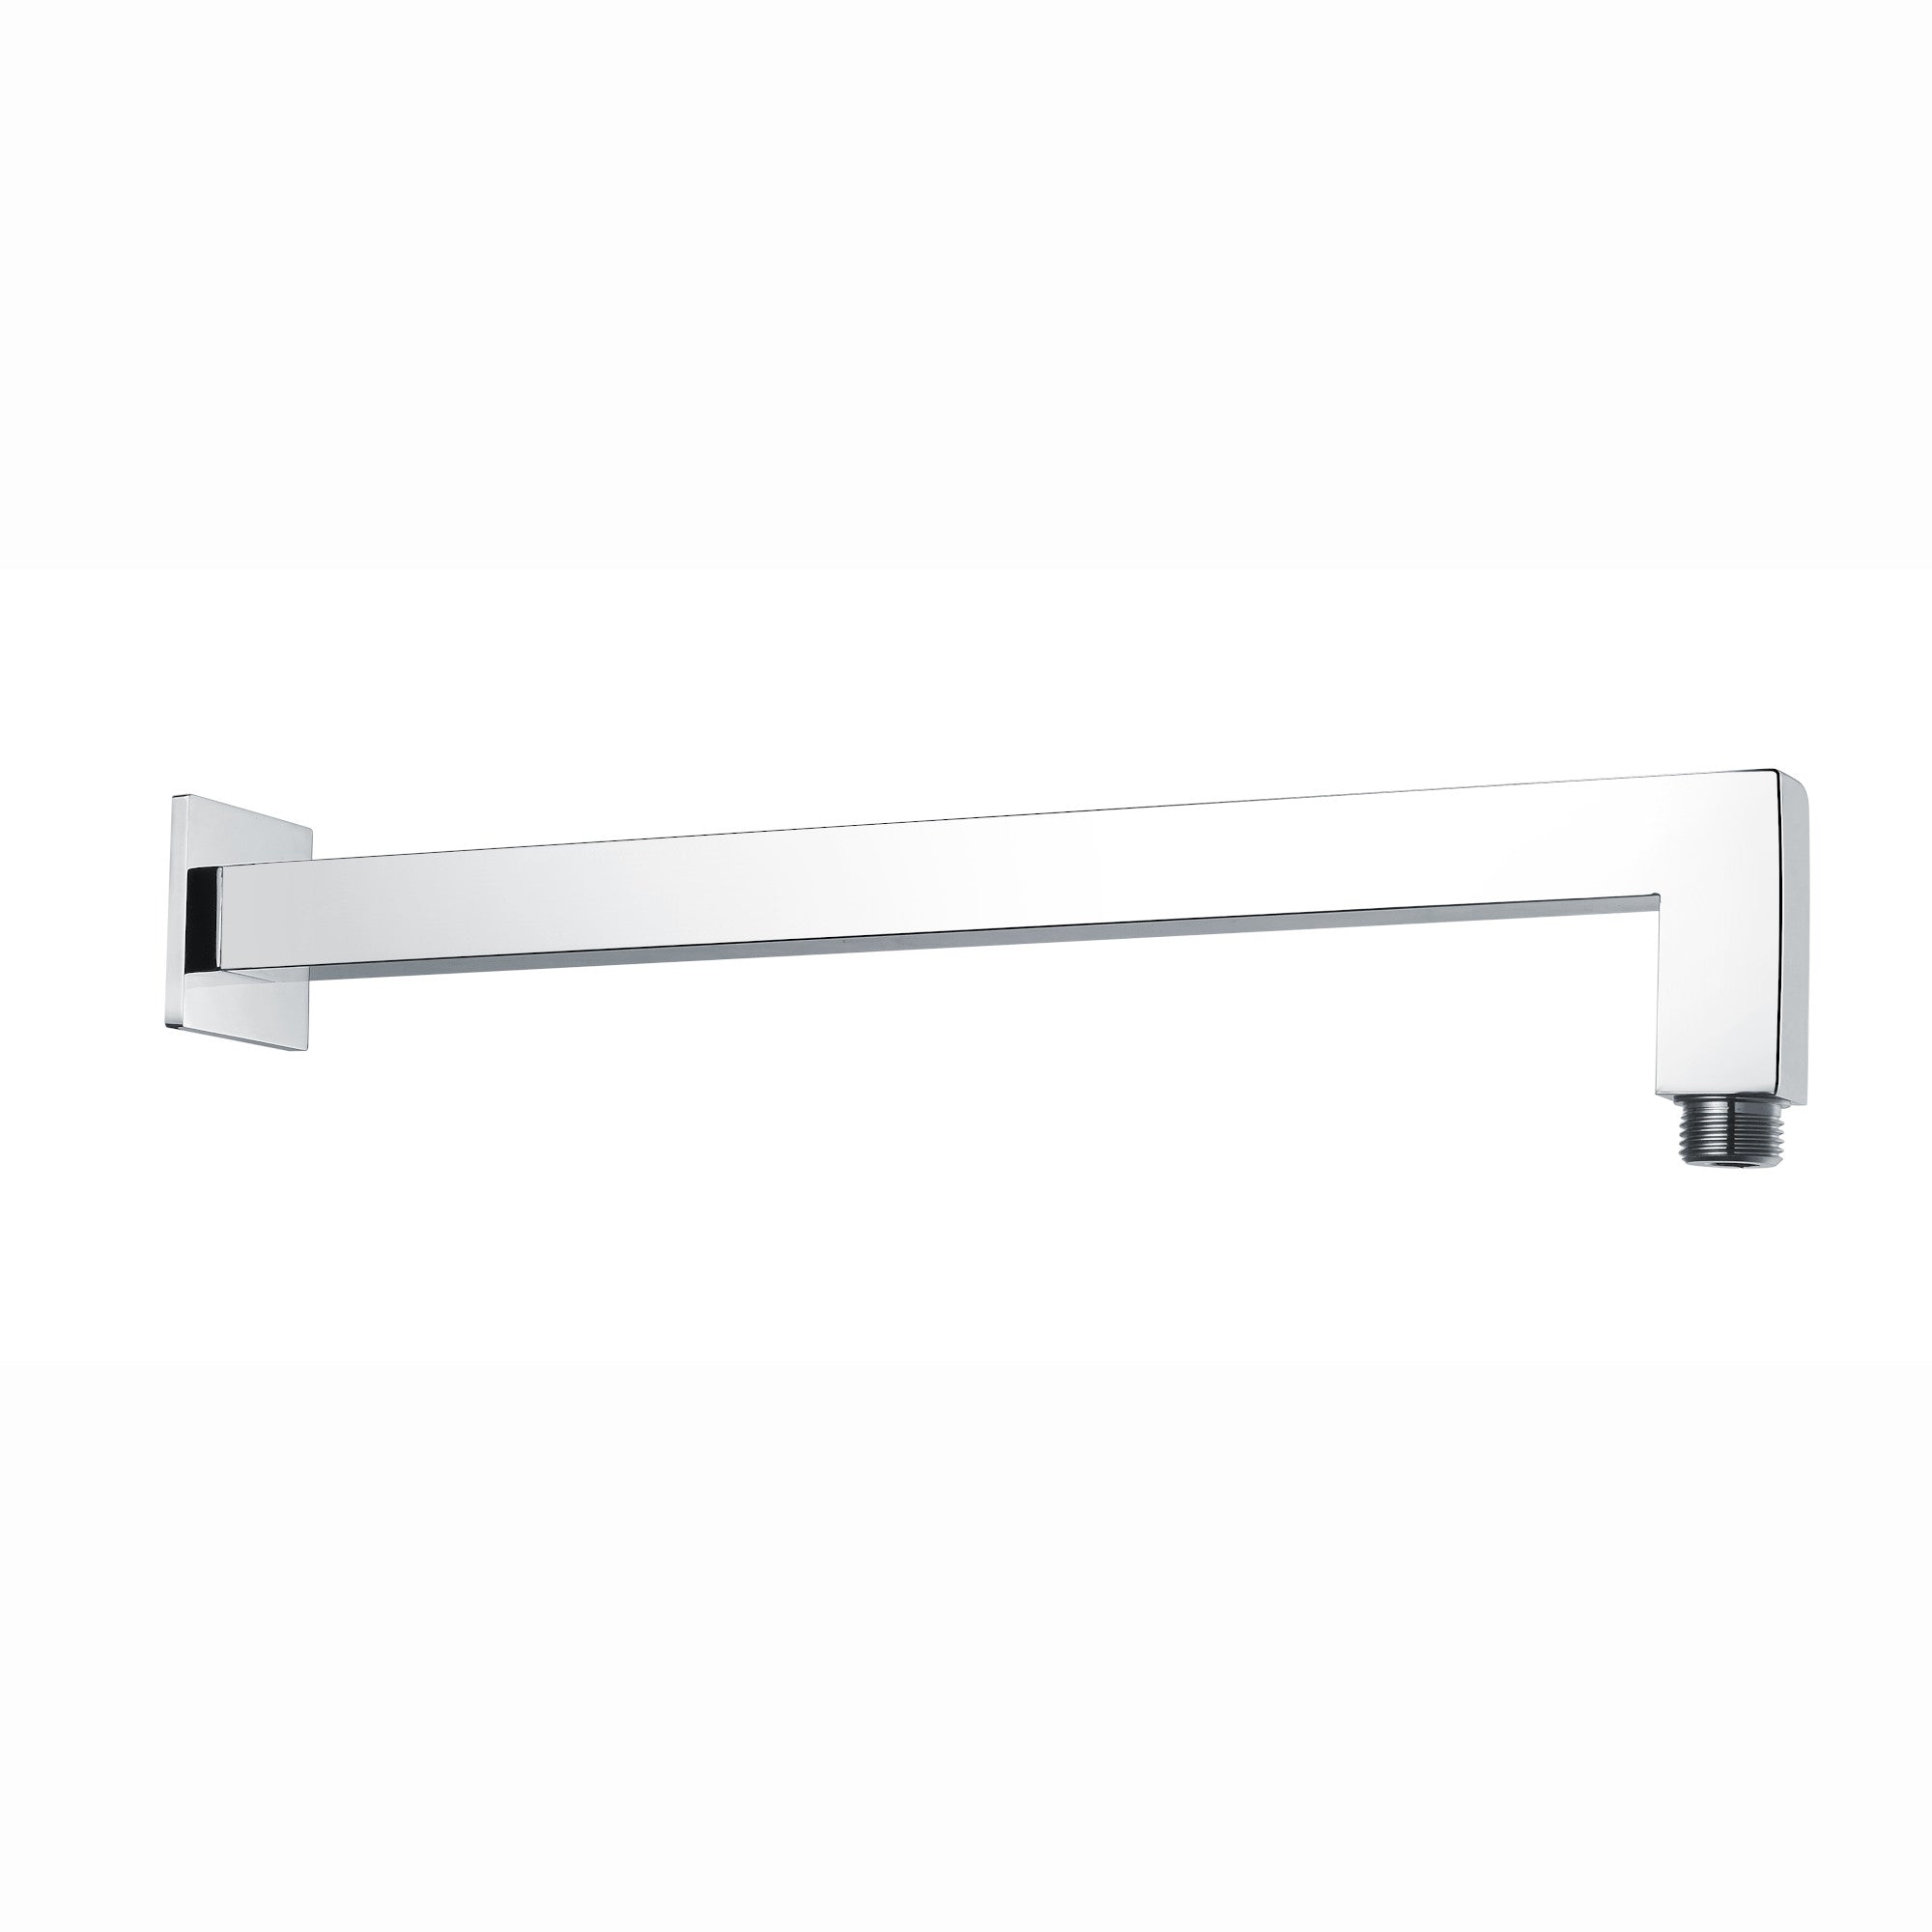 Square wall mounted 90 degree bend shower arm 370mm - chrome